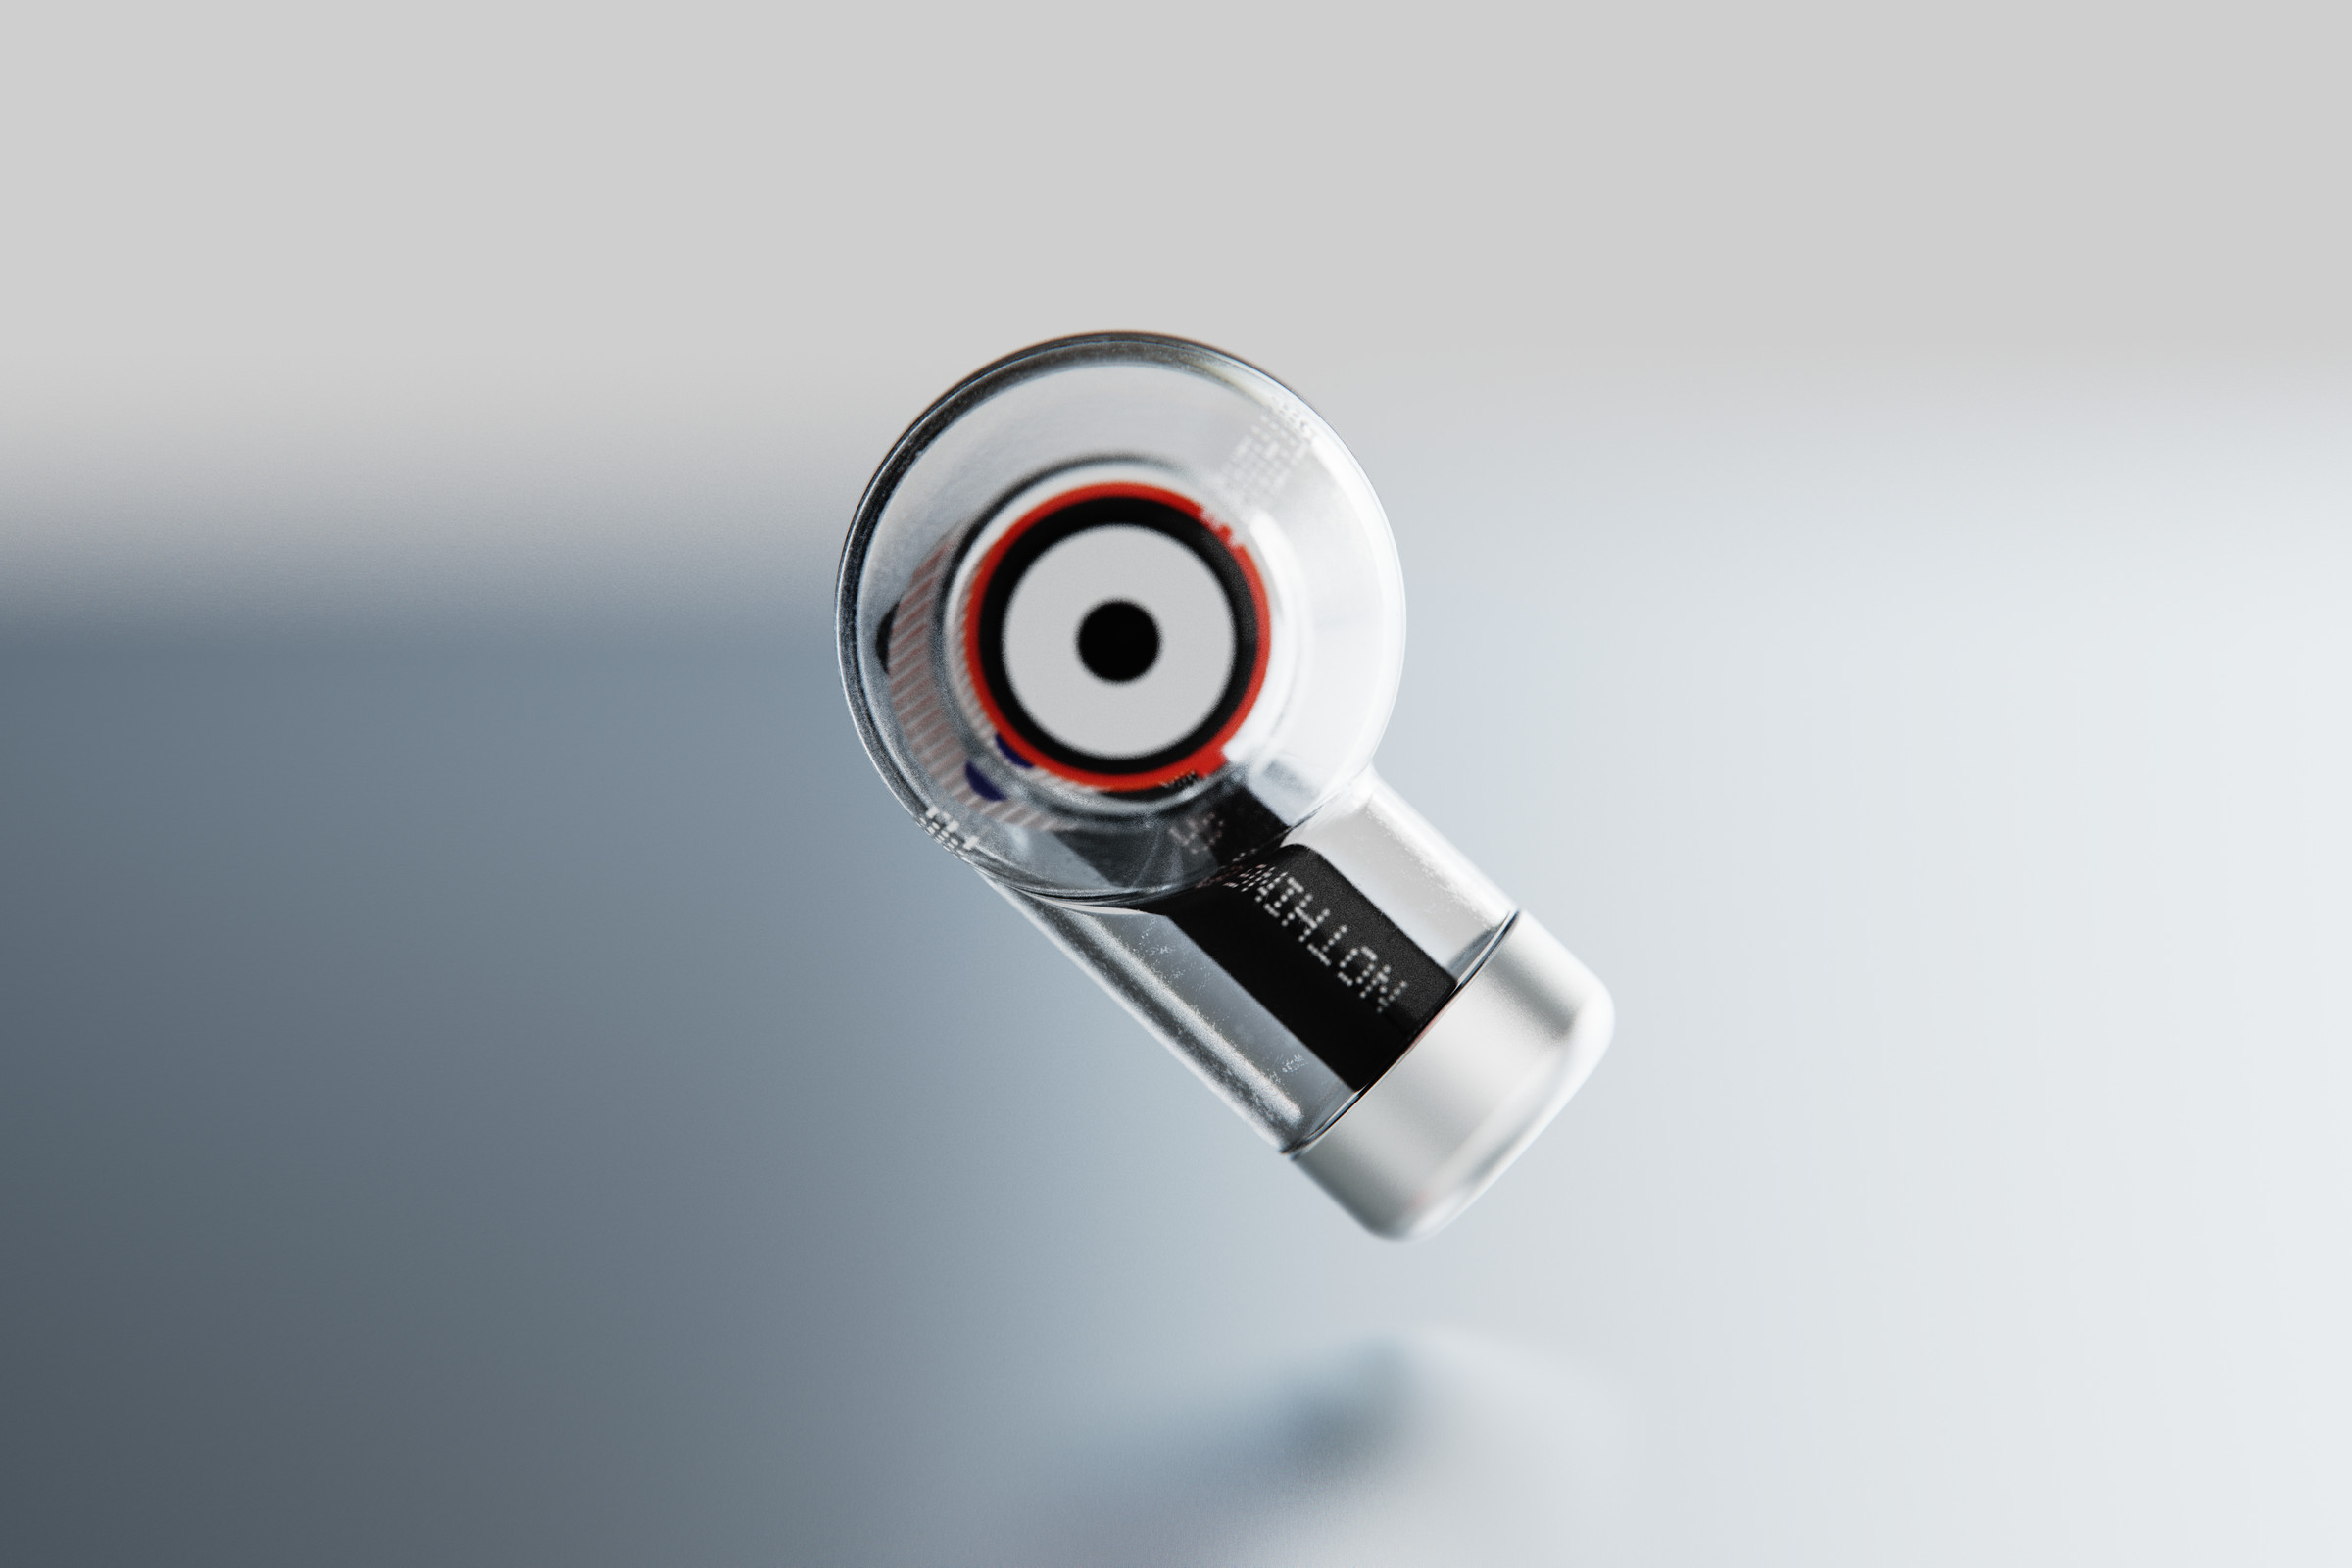 A teaser image for the design of the earbuds.